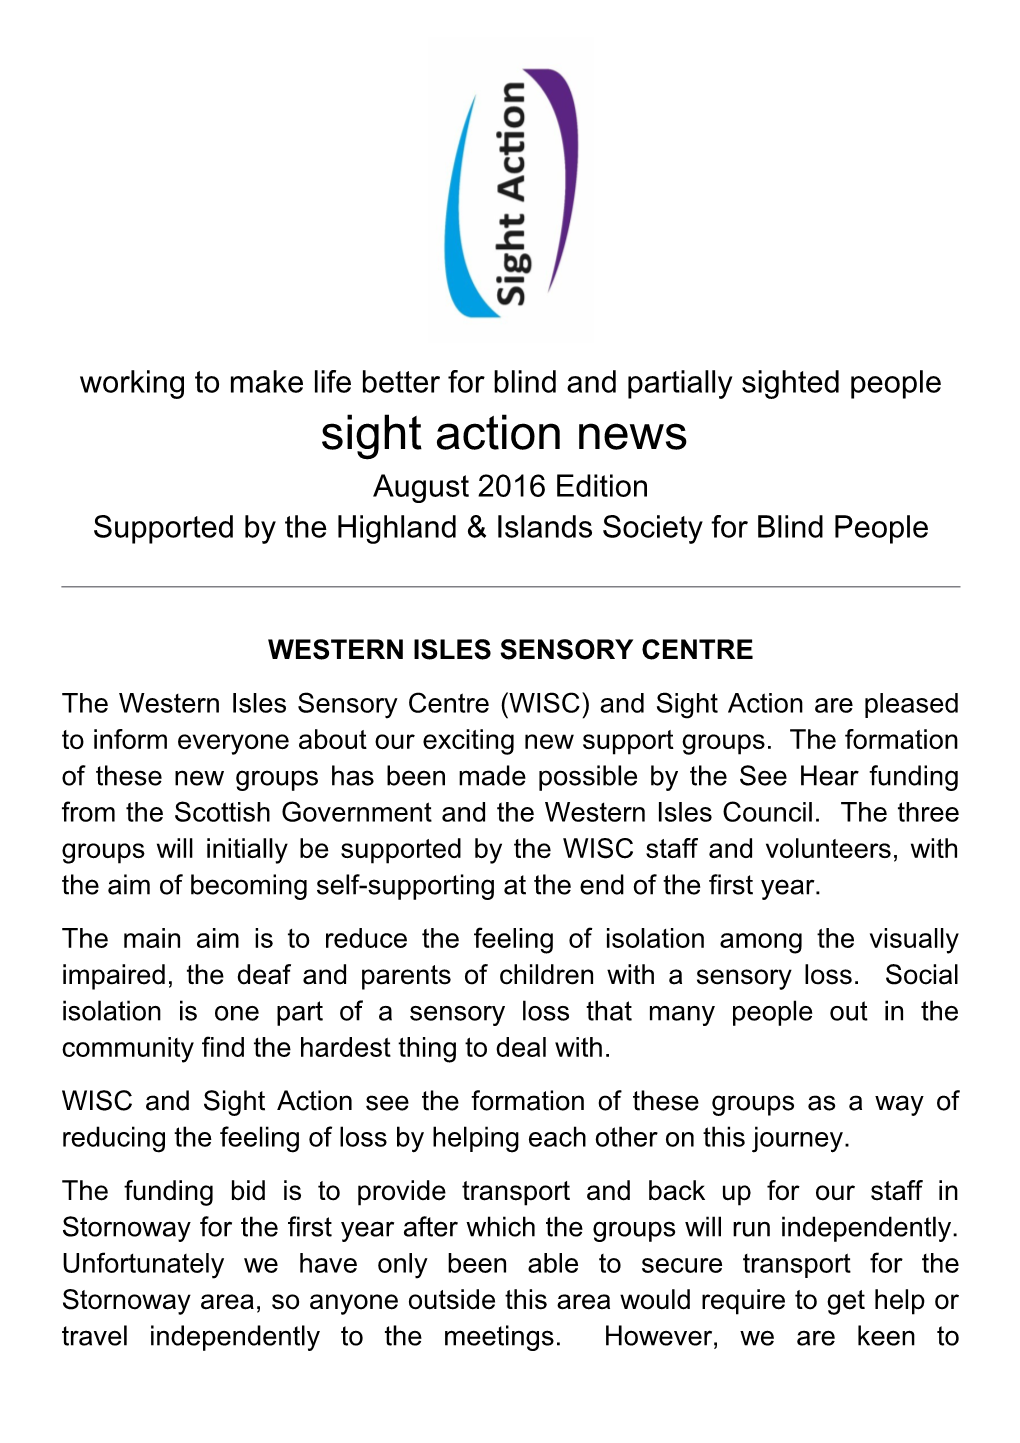 Working to Make Life Better for Blind and Partially Sighted People